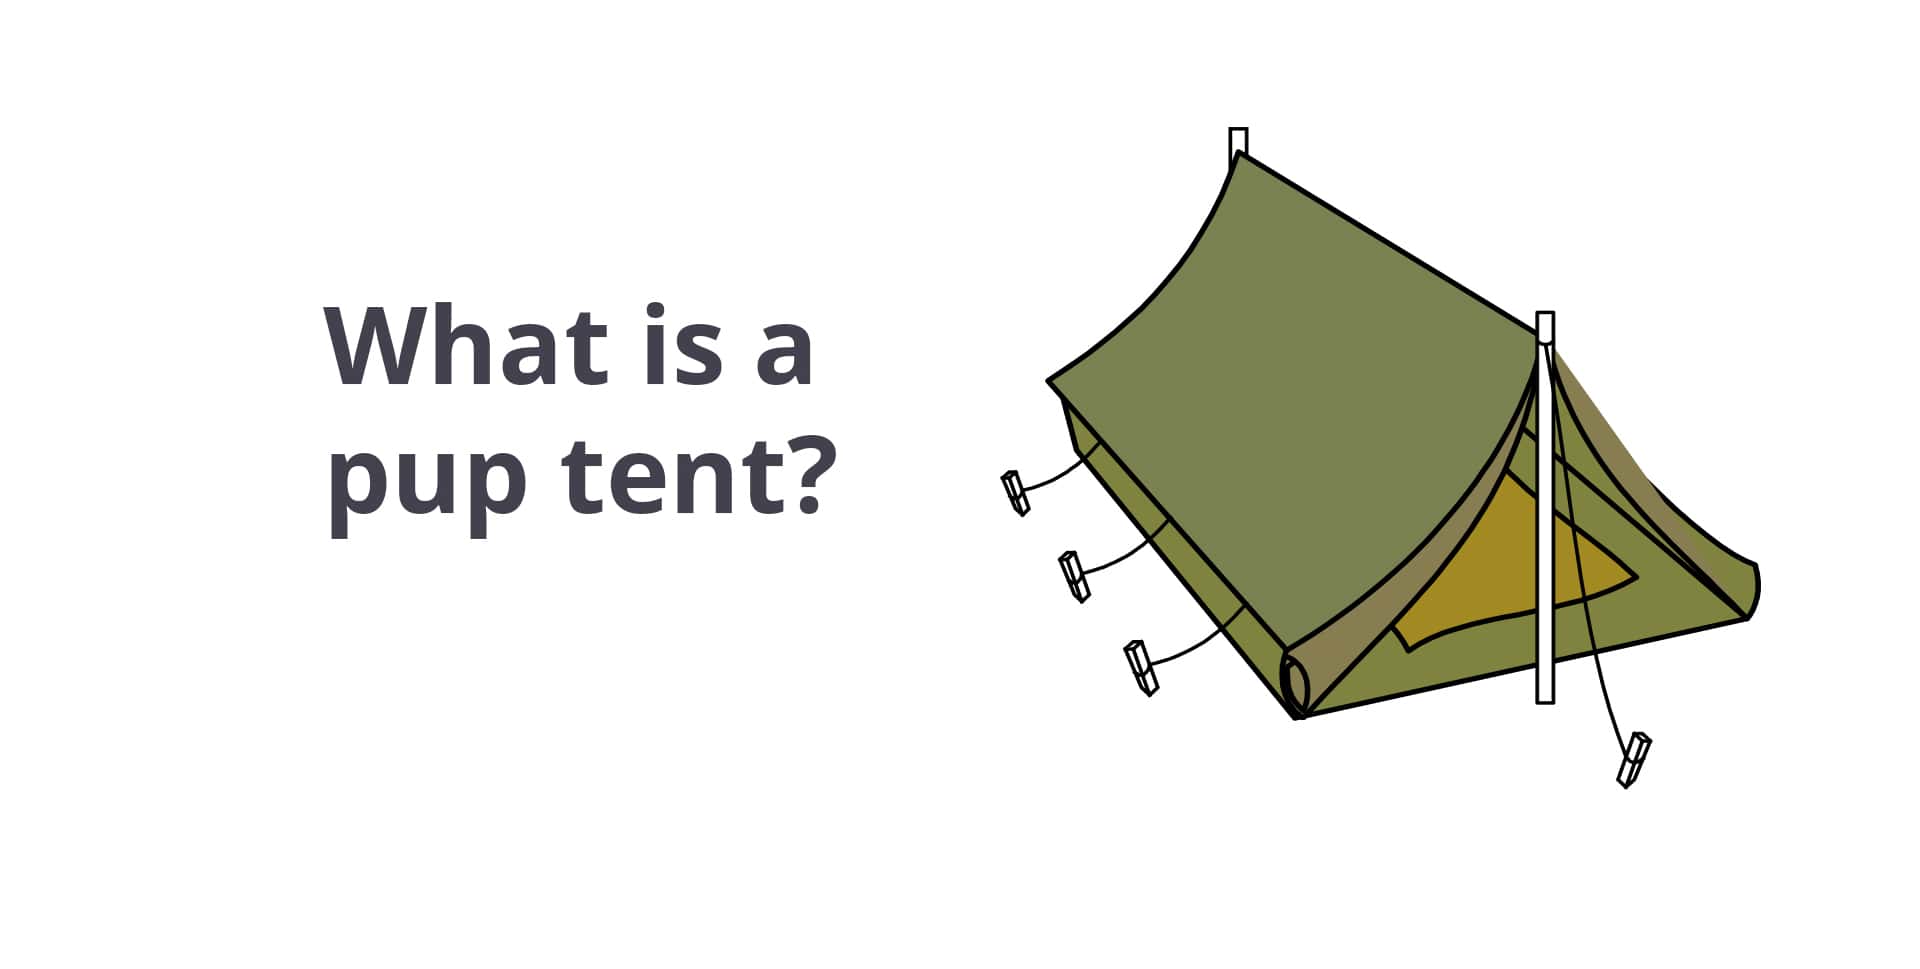 A picture of a pup tent set up for camping